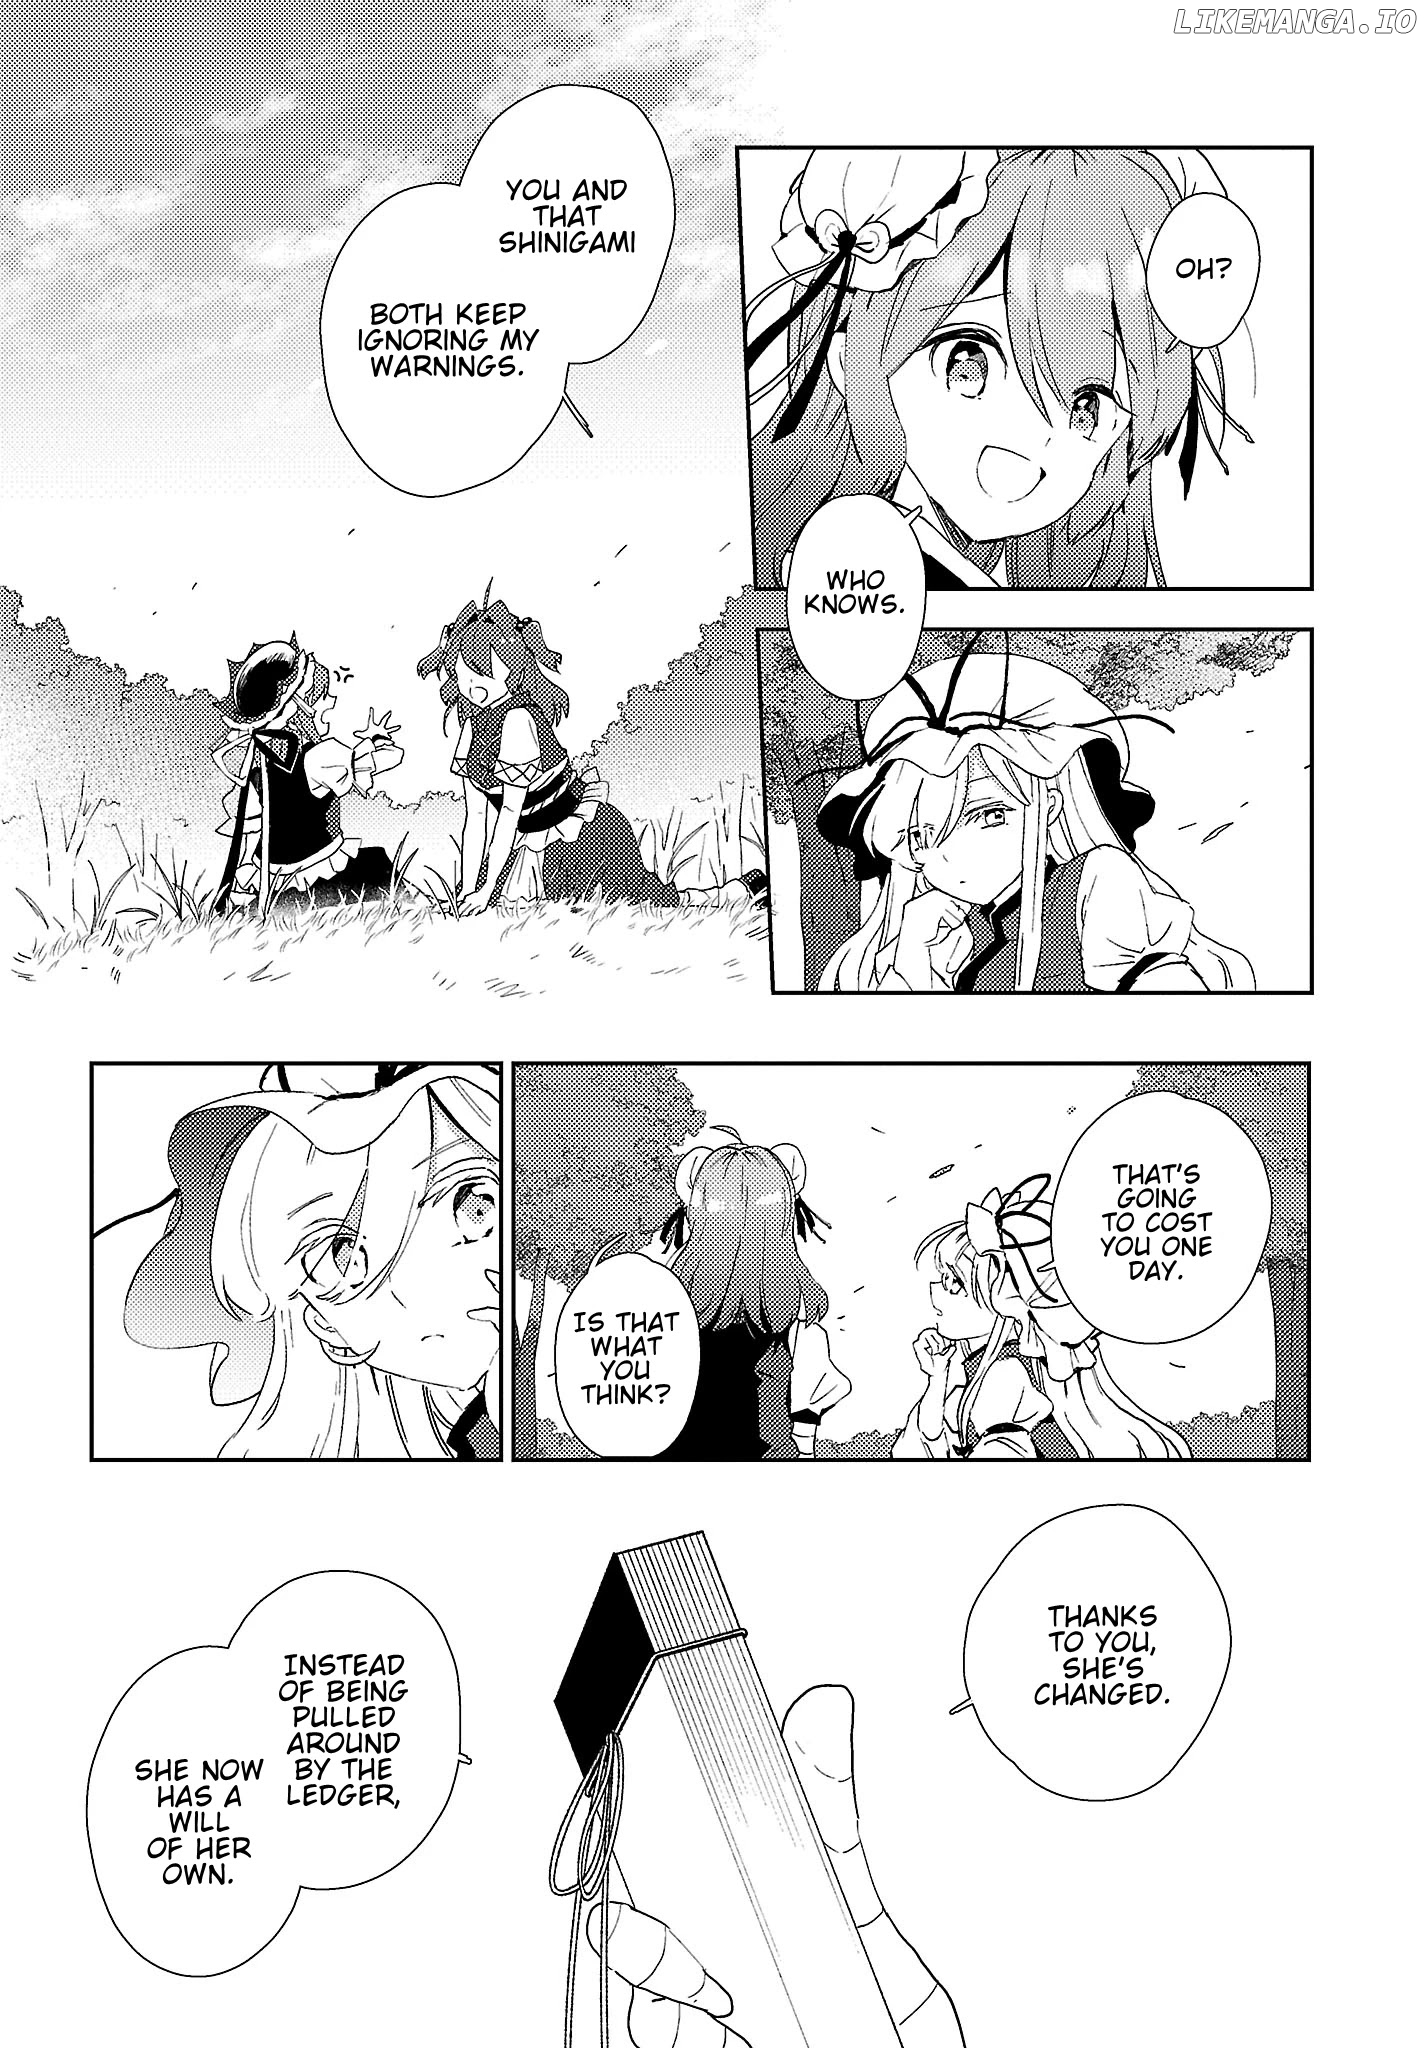 The Shinigami's Rowing Her Boat as Usual - Touhou chapter 6 - page 21